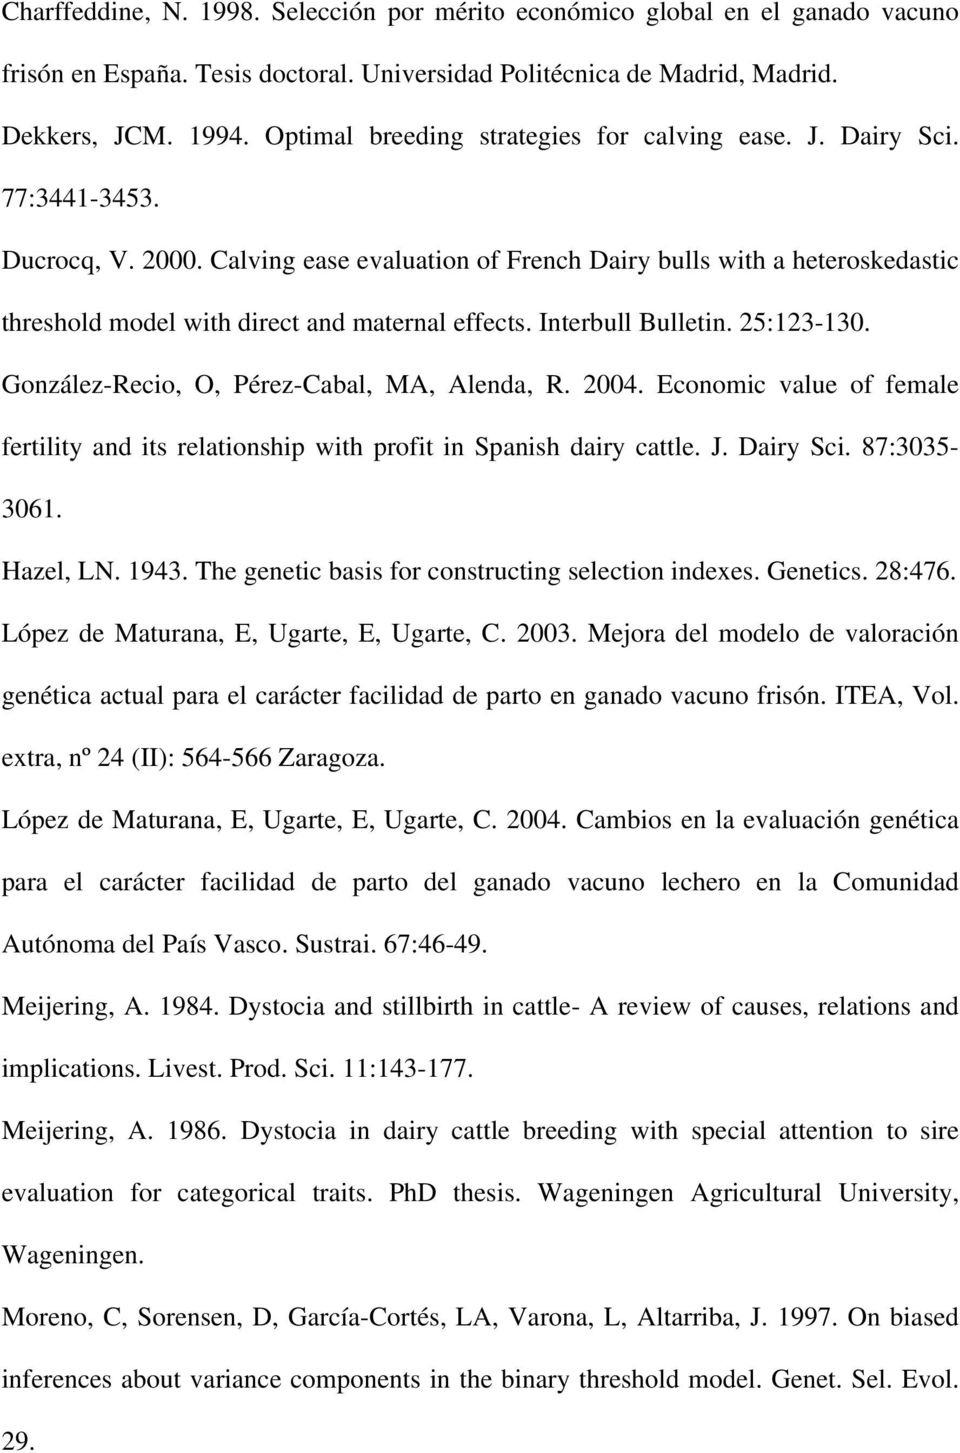 Calving ease evaluation of French Dairy bulls with a heteroskedastic threshold model with direct and maternal effects. Interbull Bulletin. 25:123-130. González-Recio, O, Pérez-Cabal, MA, Alenda, R.